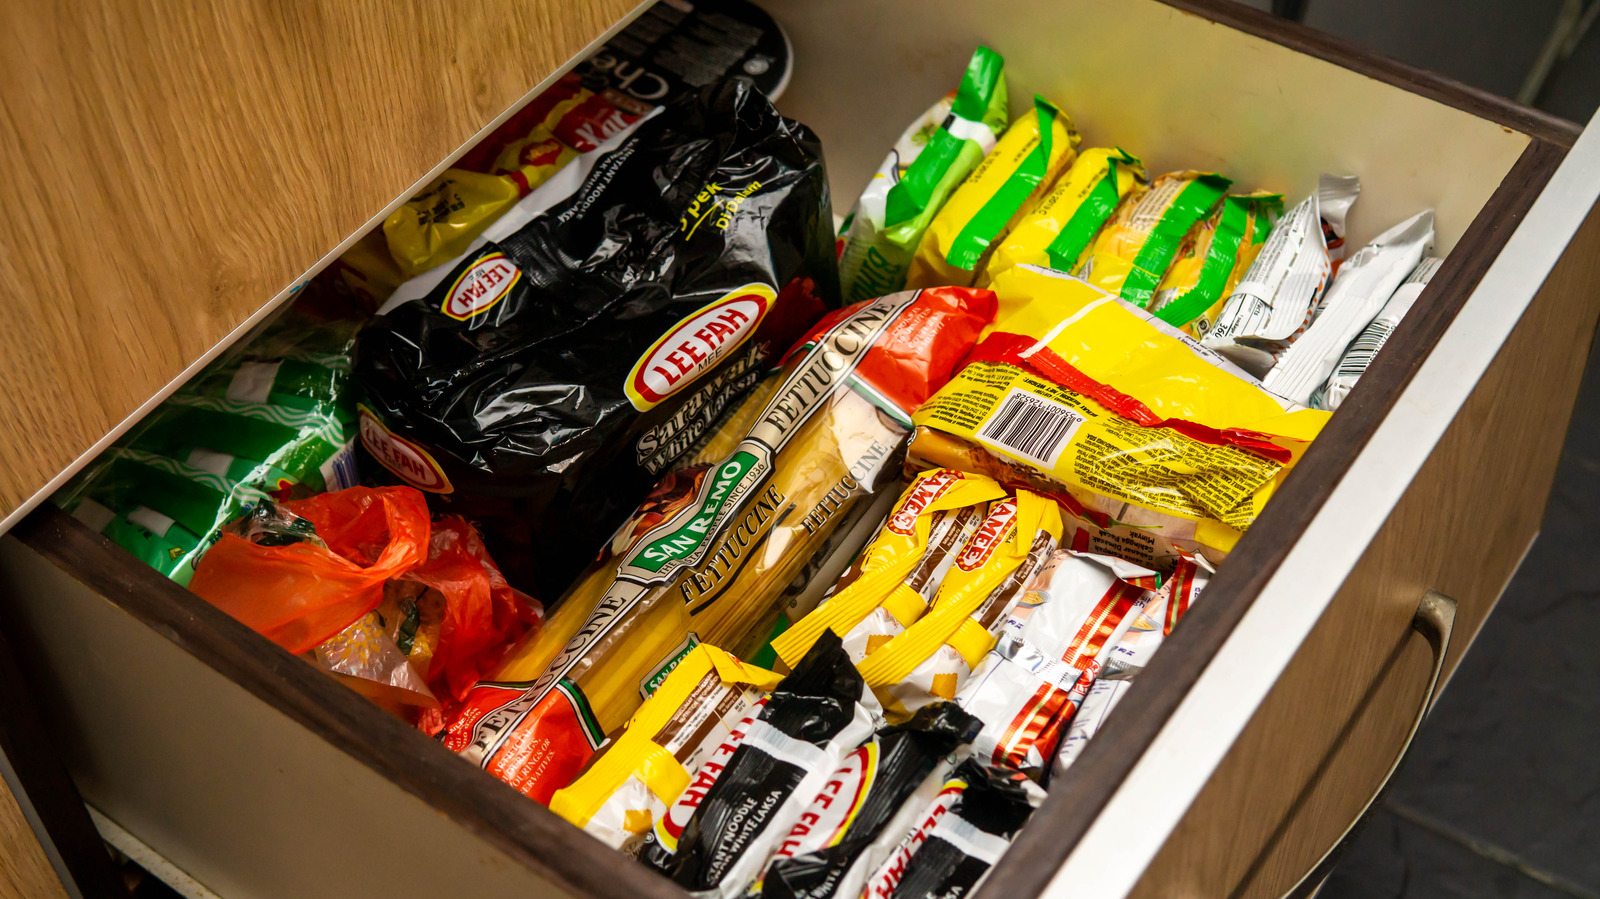 Save Kitchen Drawer Space With This Vertical Snack Organization Tip